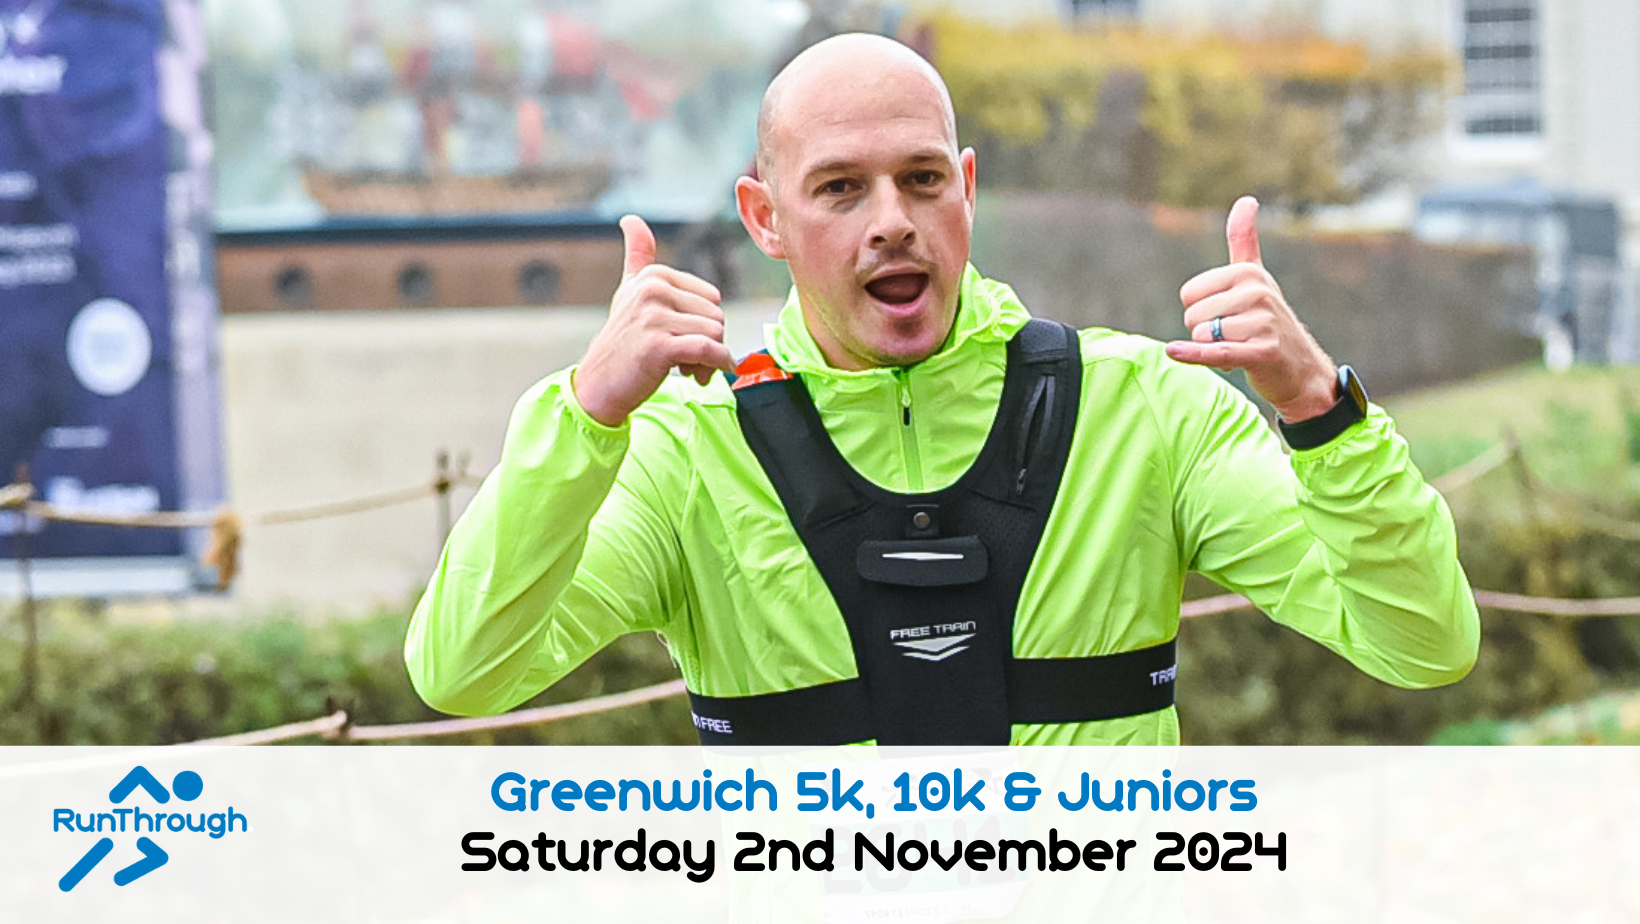 Image for RunThrough Greenwich Park 5k